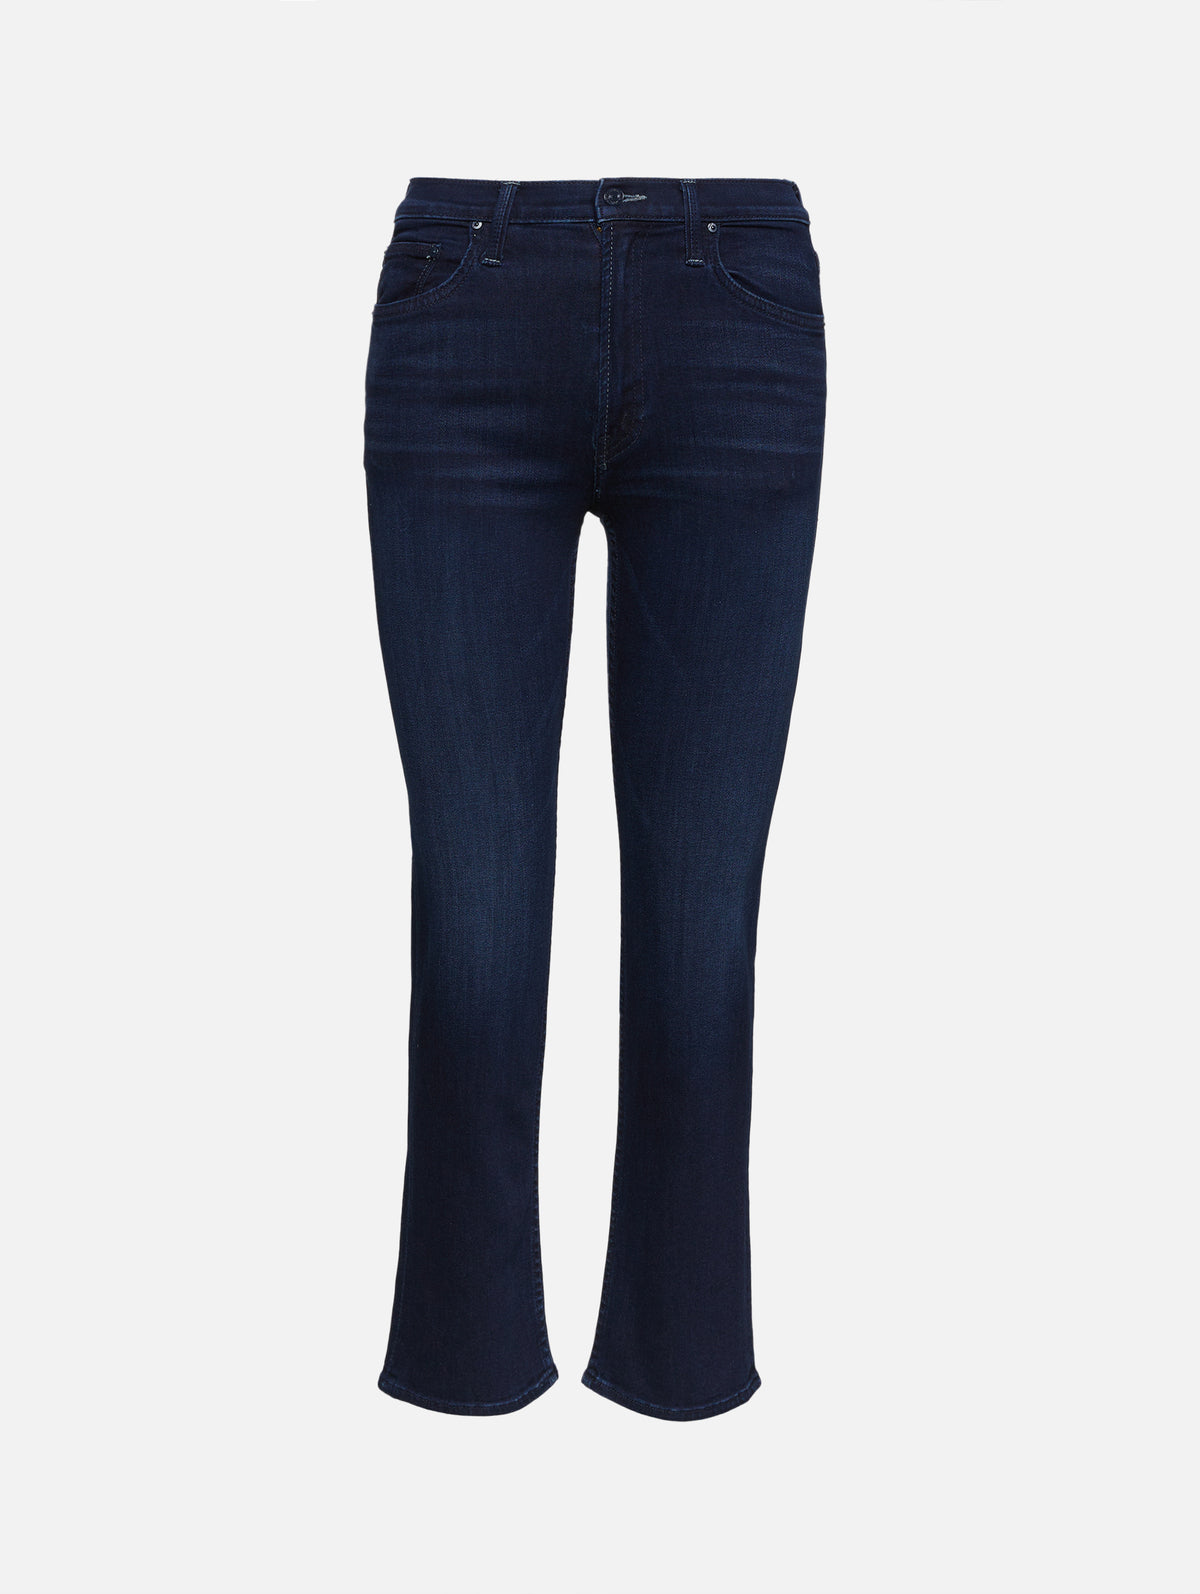 view 1 - Mid Rise Rider Ankle Jean